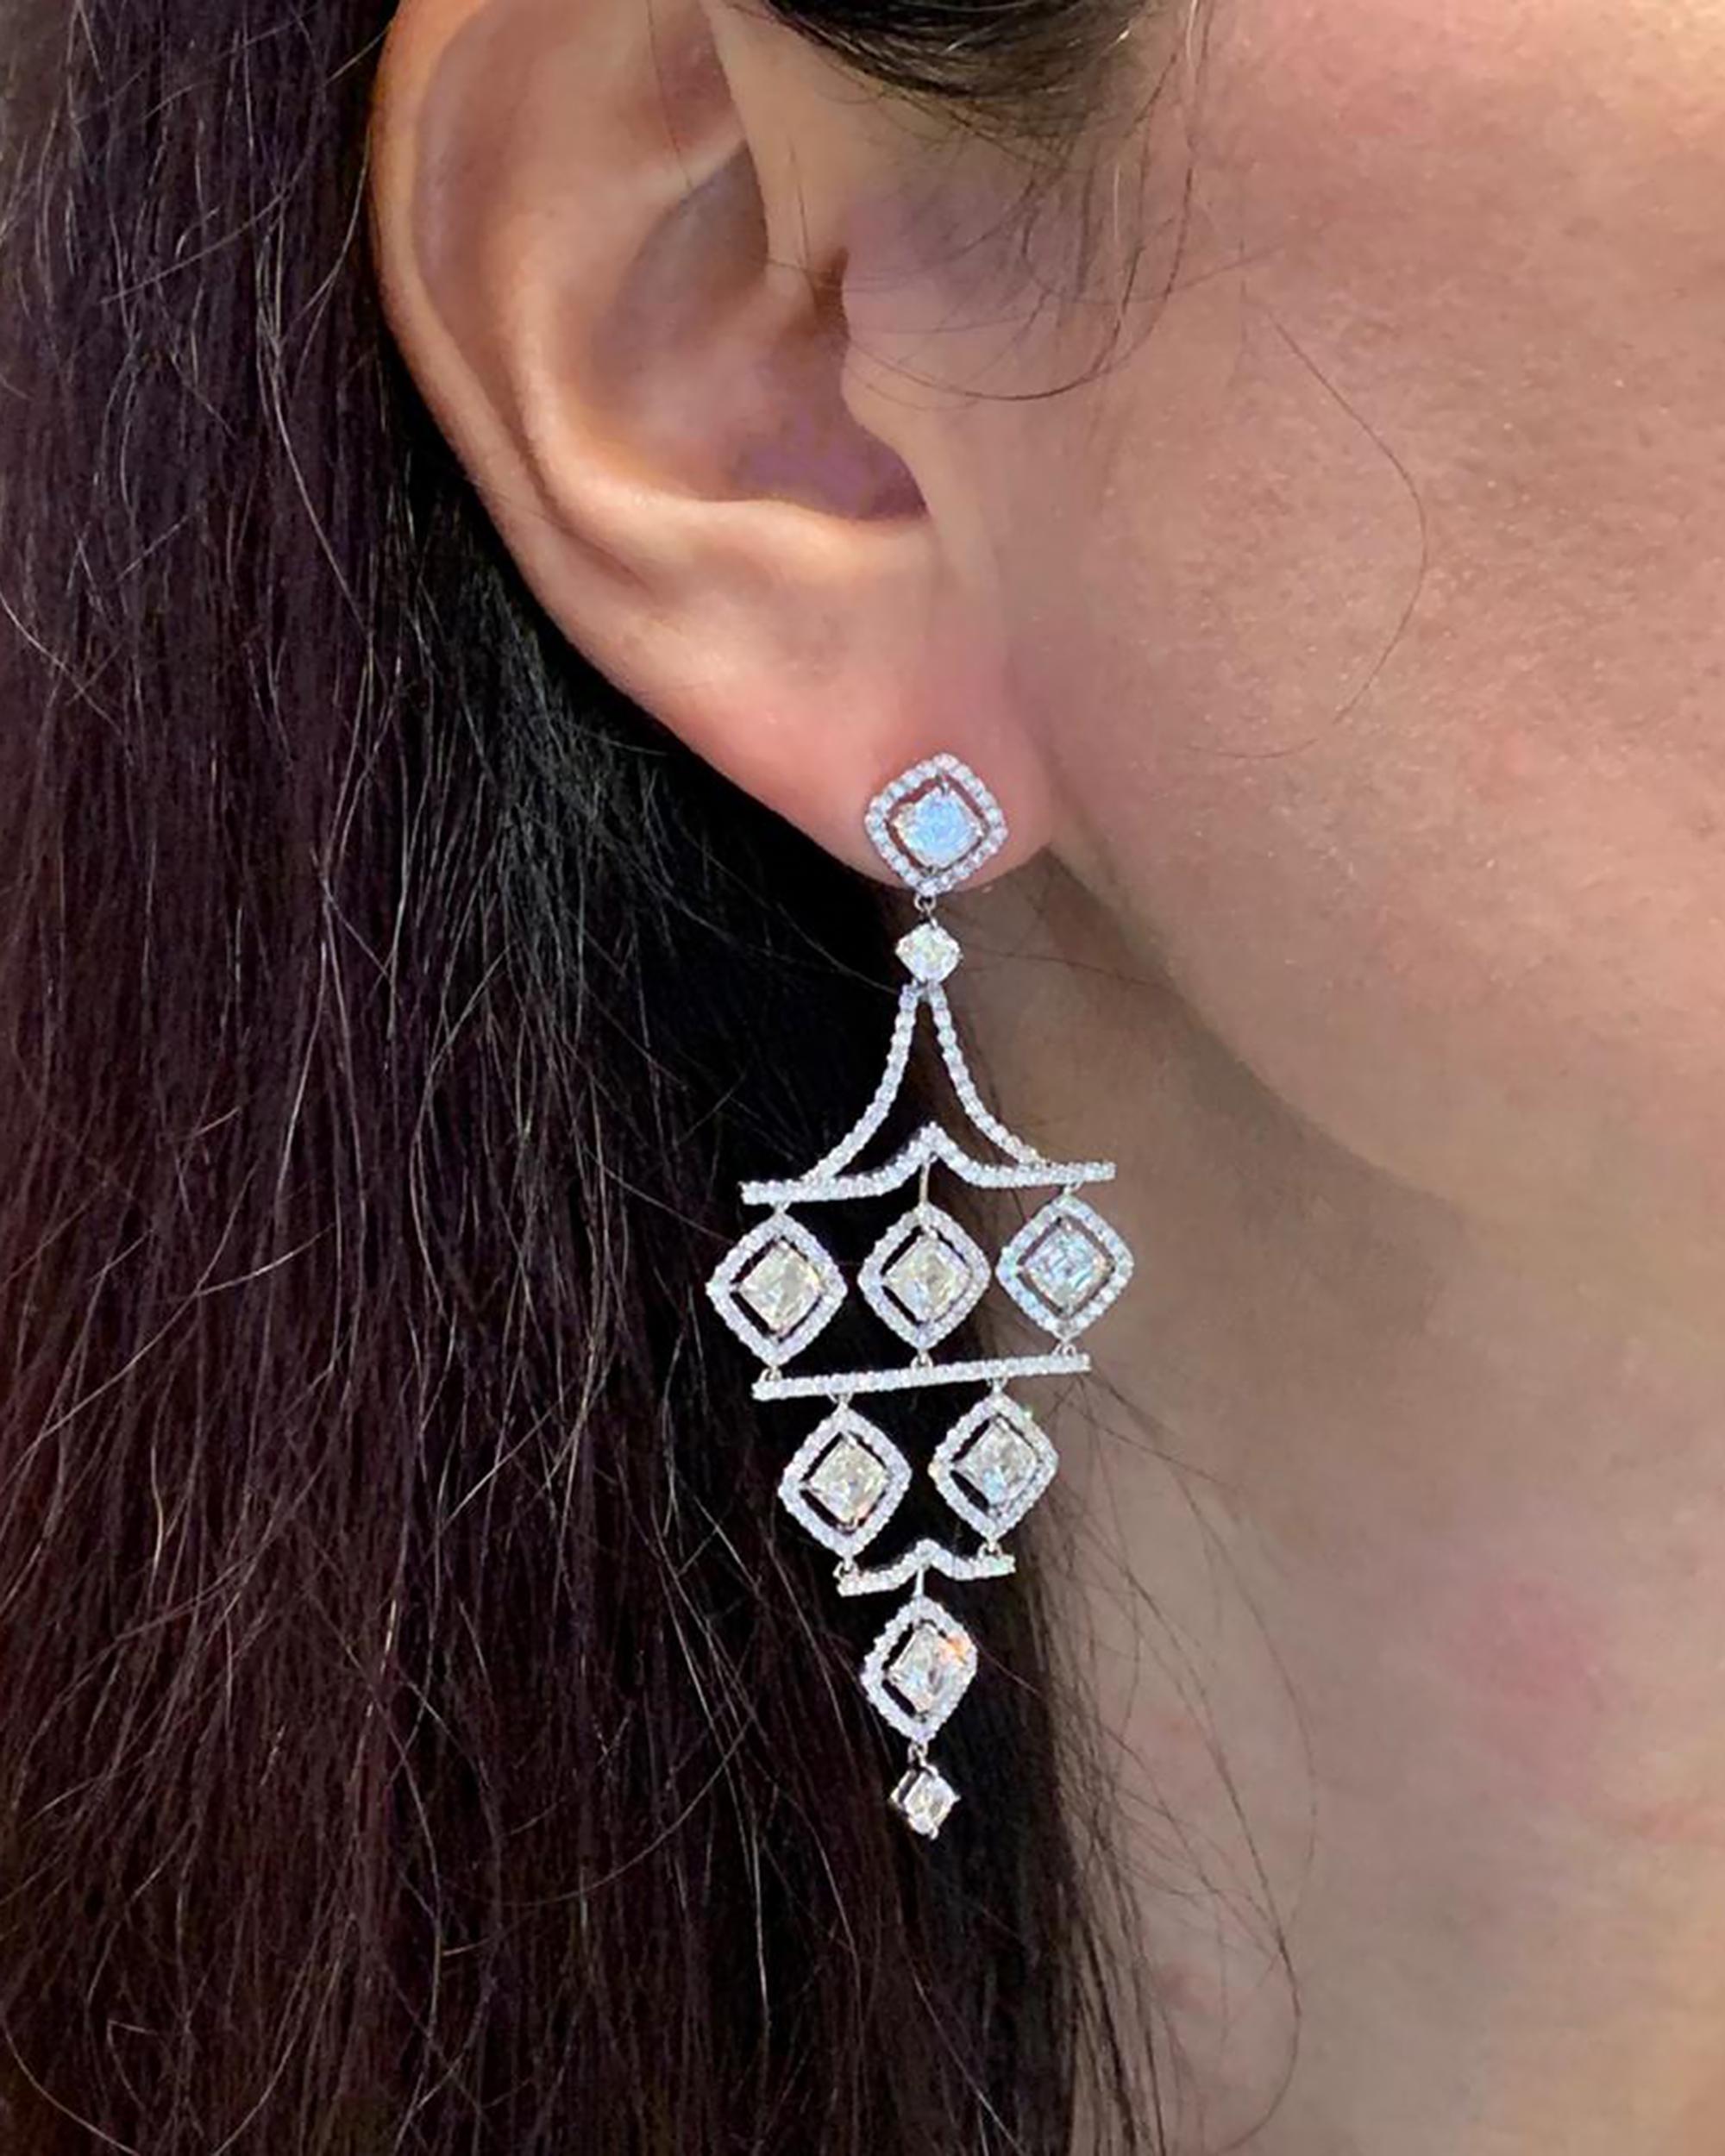 black triangle earrings meaning